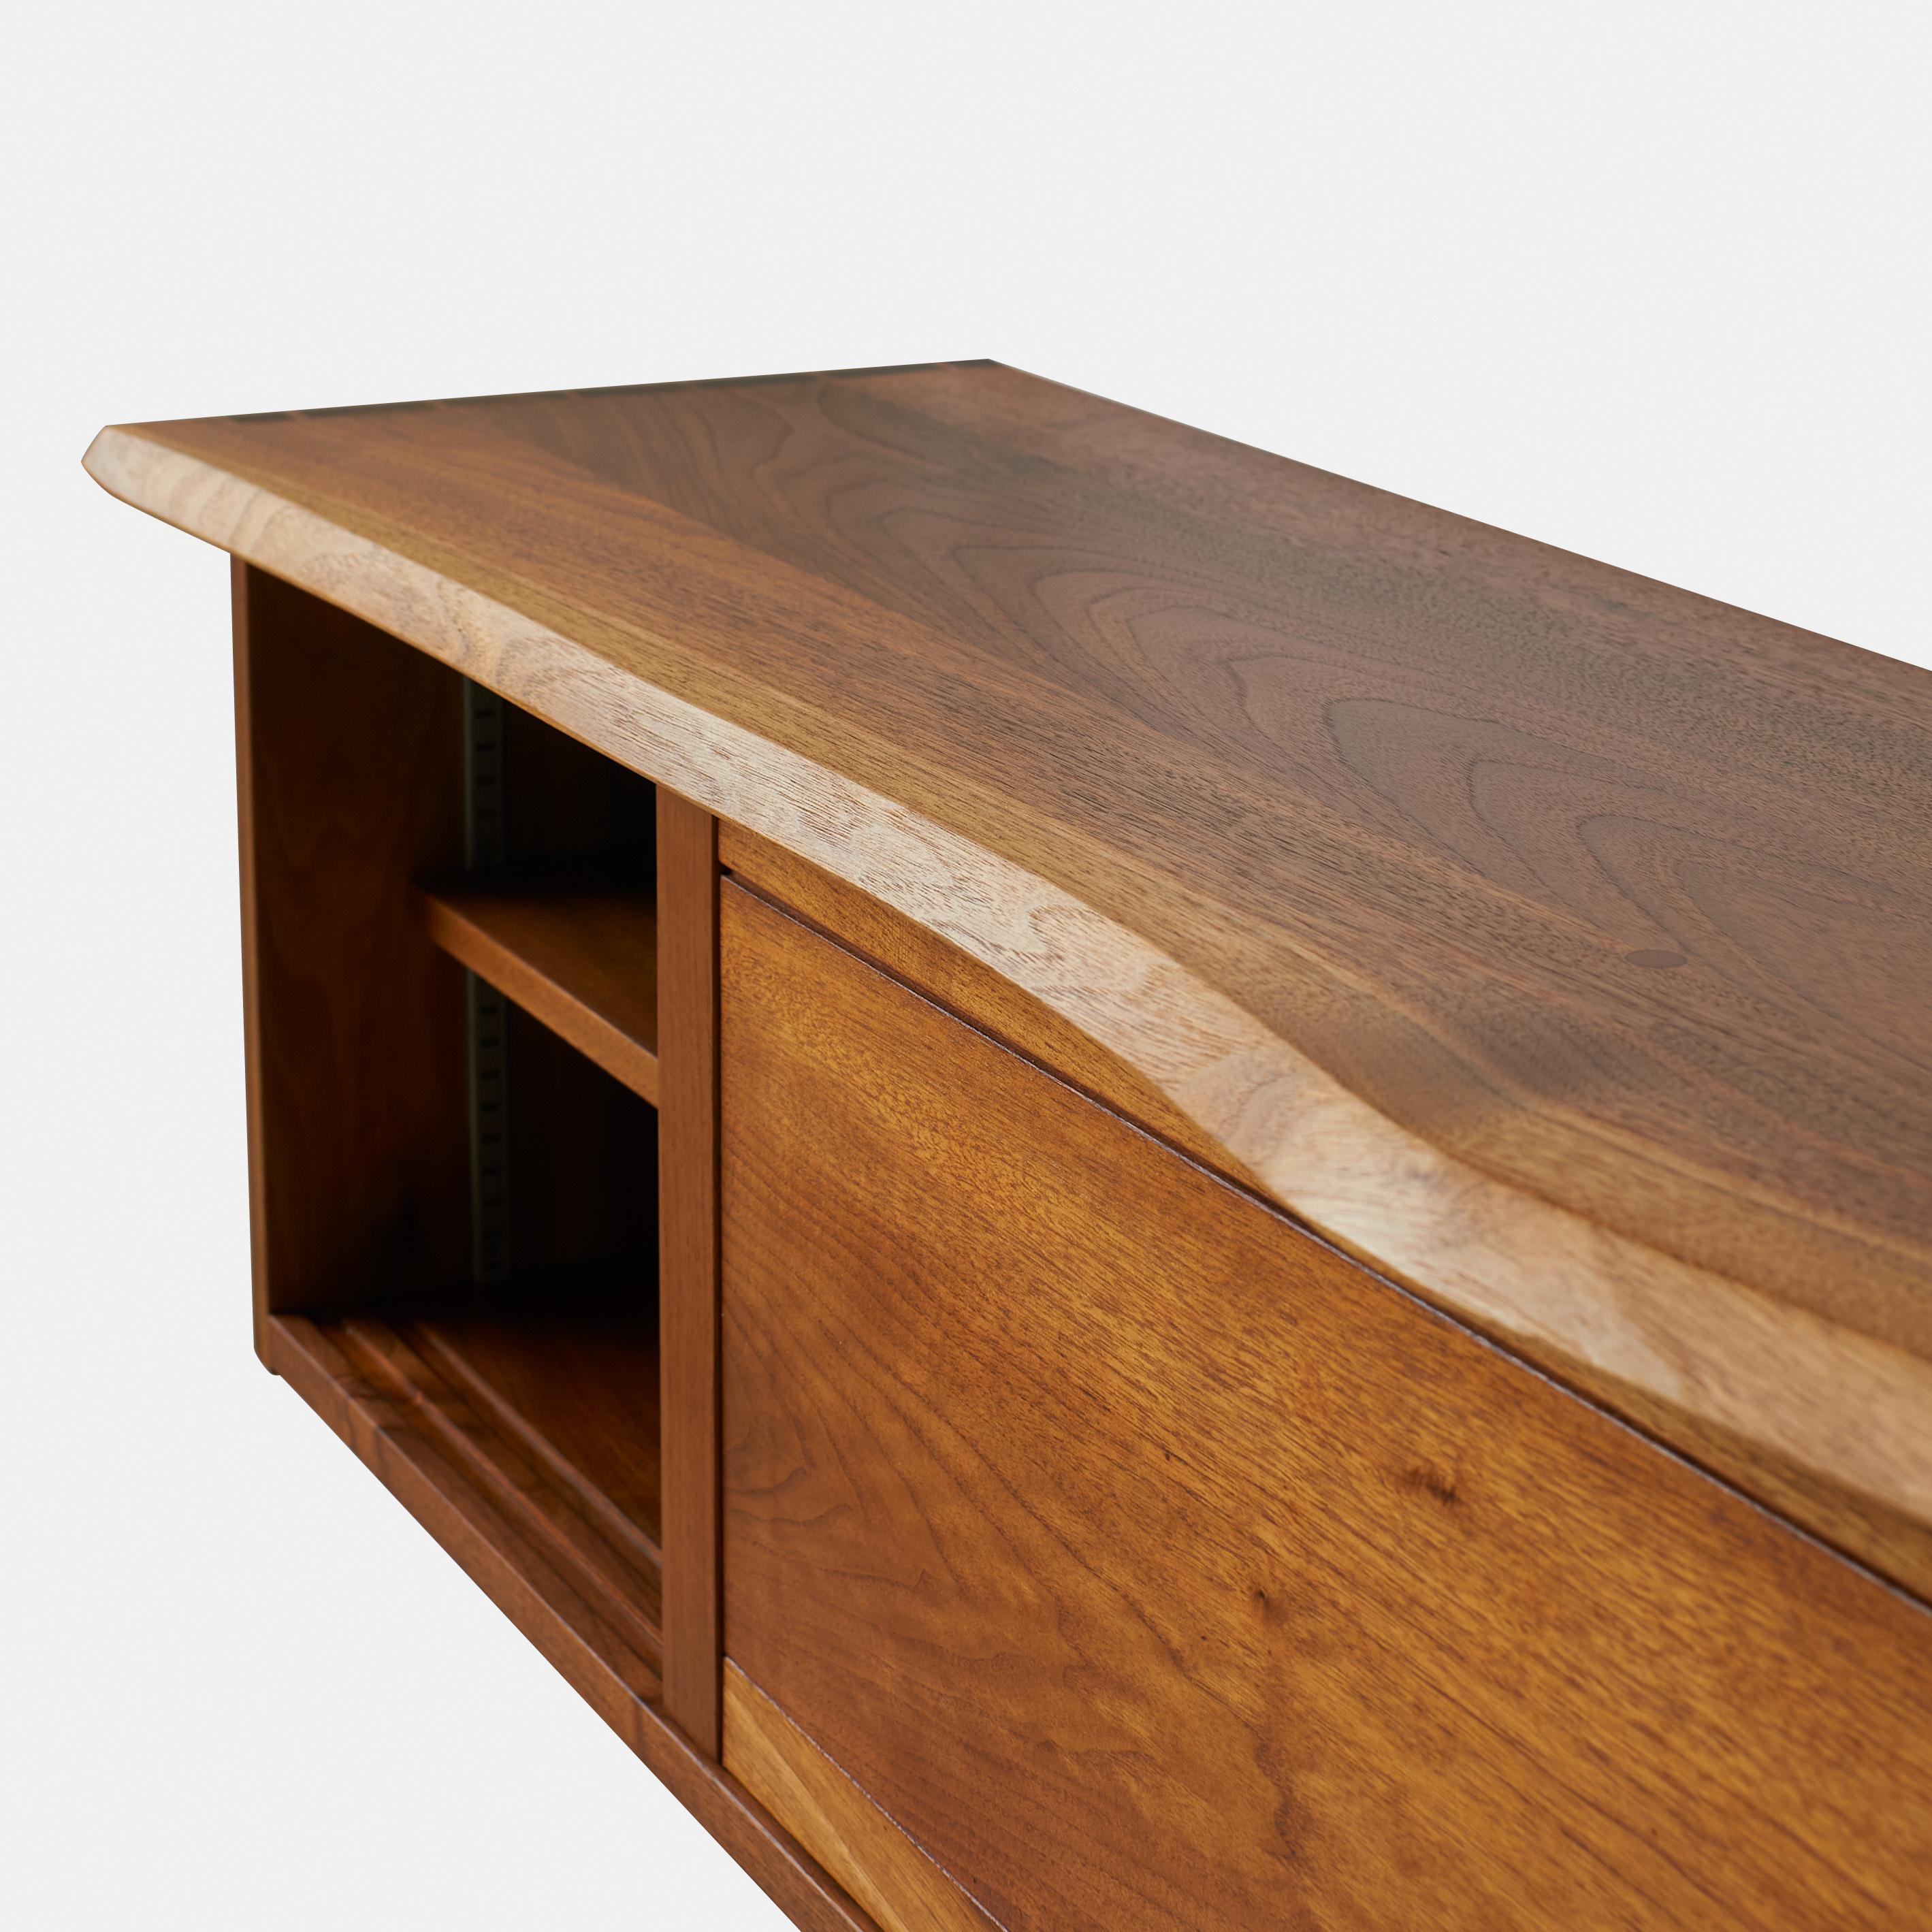 Hanging Cabinet by George Nakashima In Excellent Condition For Sale In San Francisco, CA